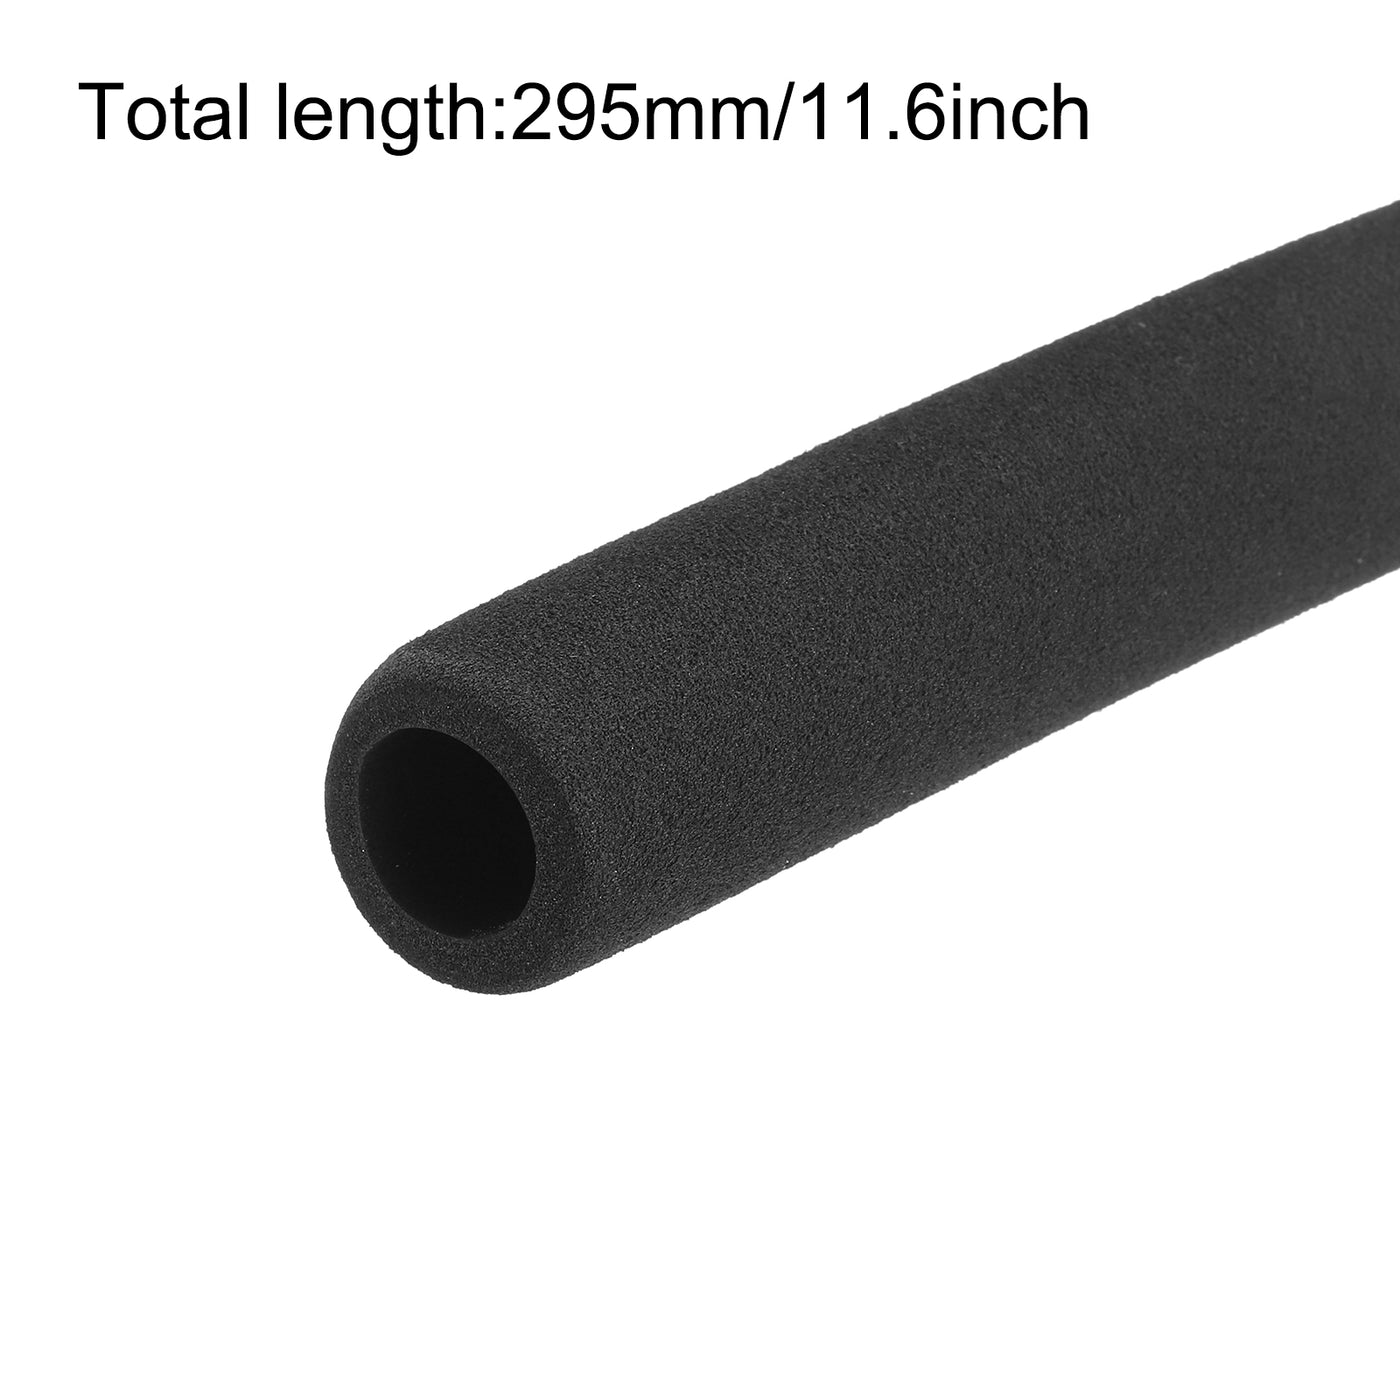 uxcell Uxcell Pipe Insulation Tube Foam Tubing for Handle Grip Support 18mm ID 30mm OD 295mm Heat Preservation Black